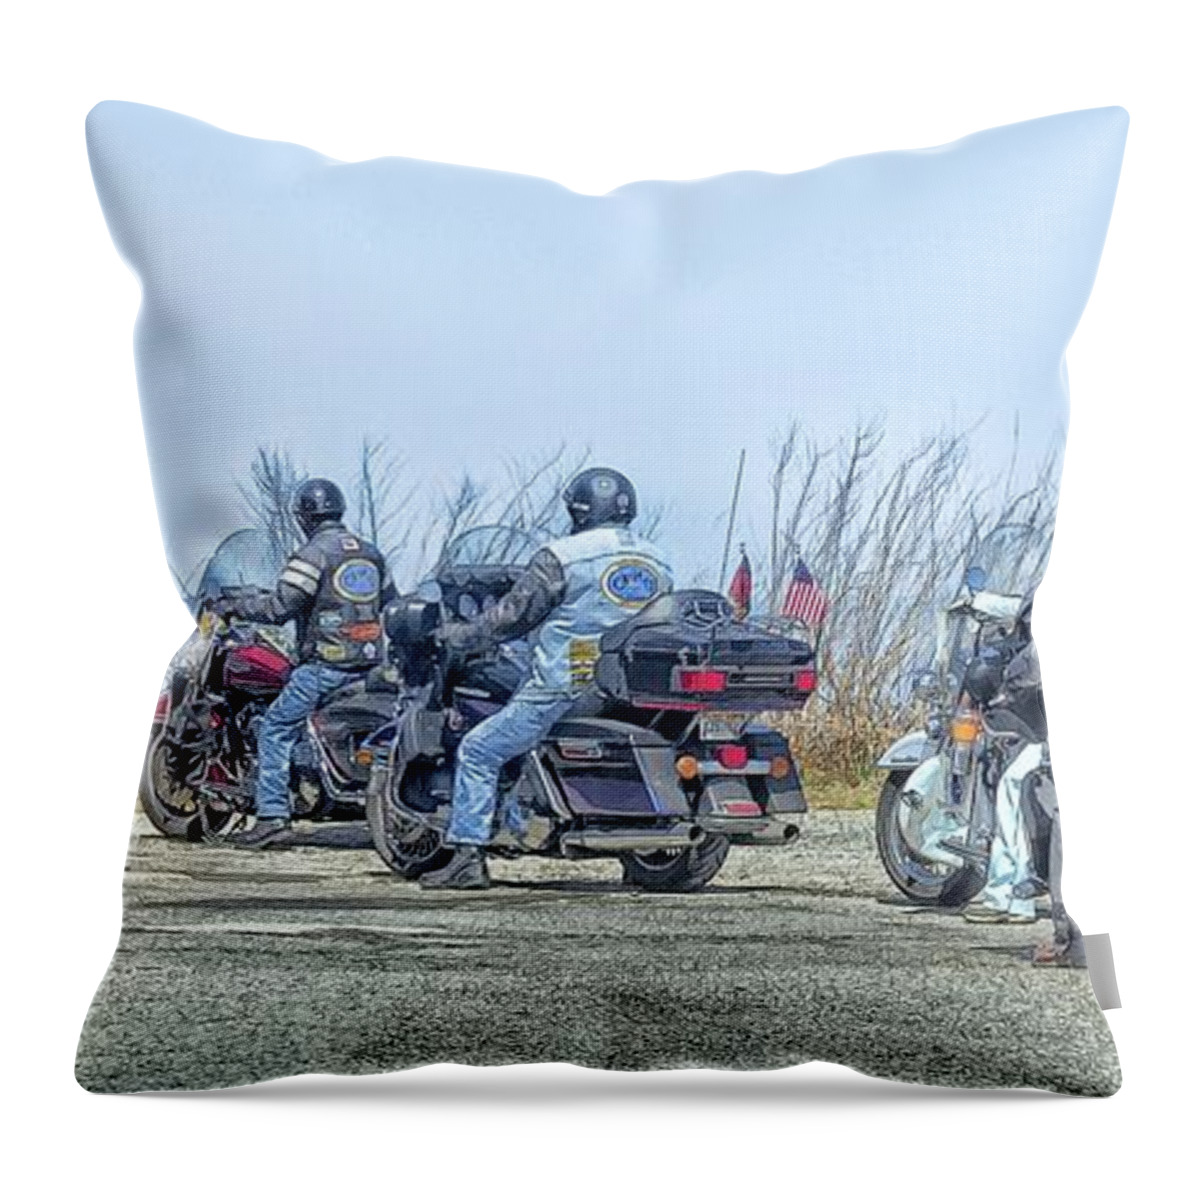 Harley-davidson Throw Pillow featuring the photograph Old Fart Riders by Constantine Gregory